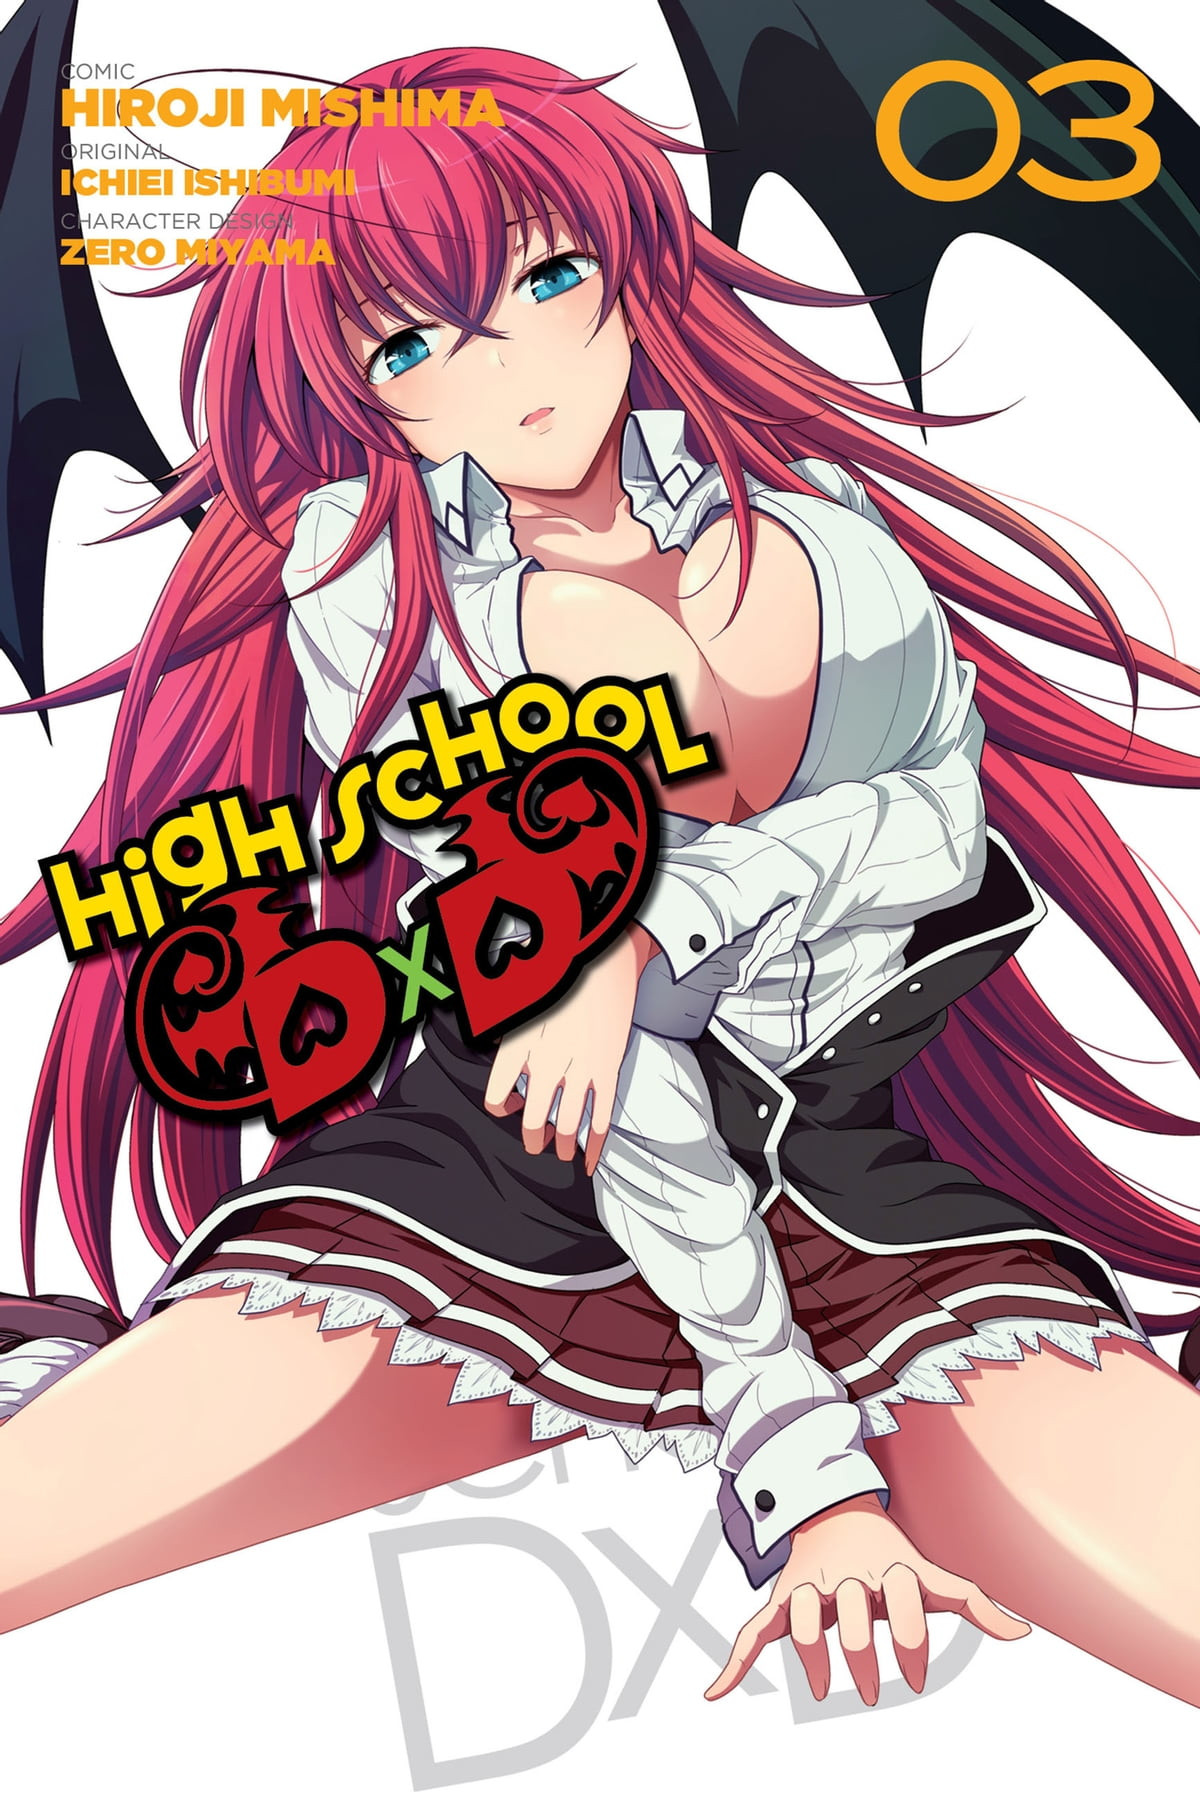 High School DxD spinoff